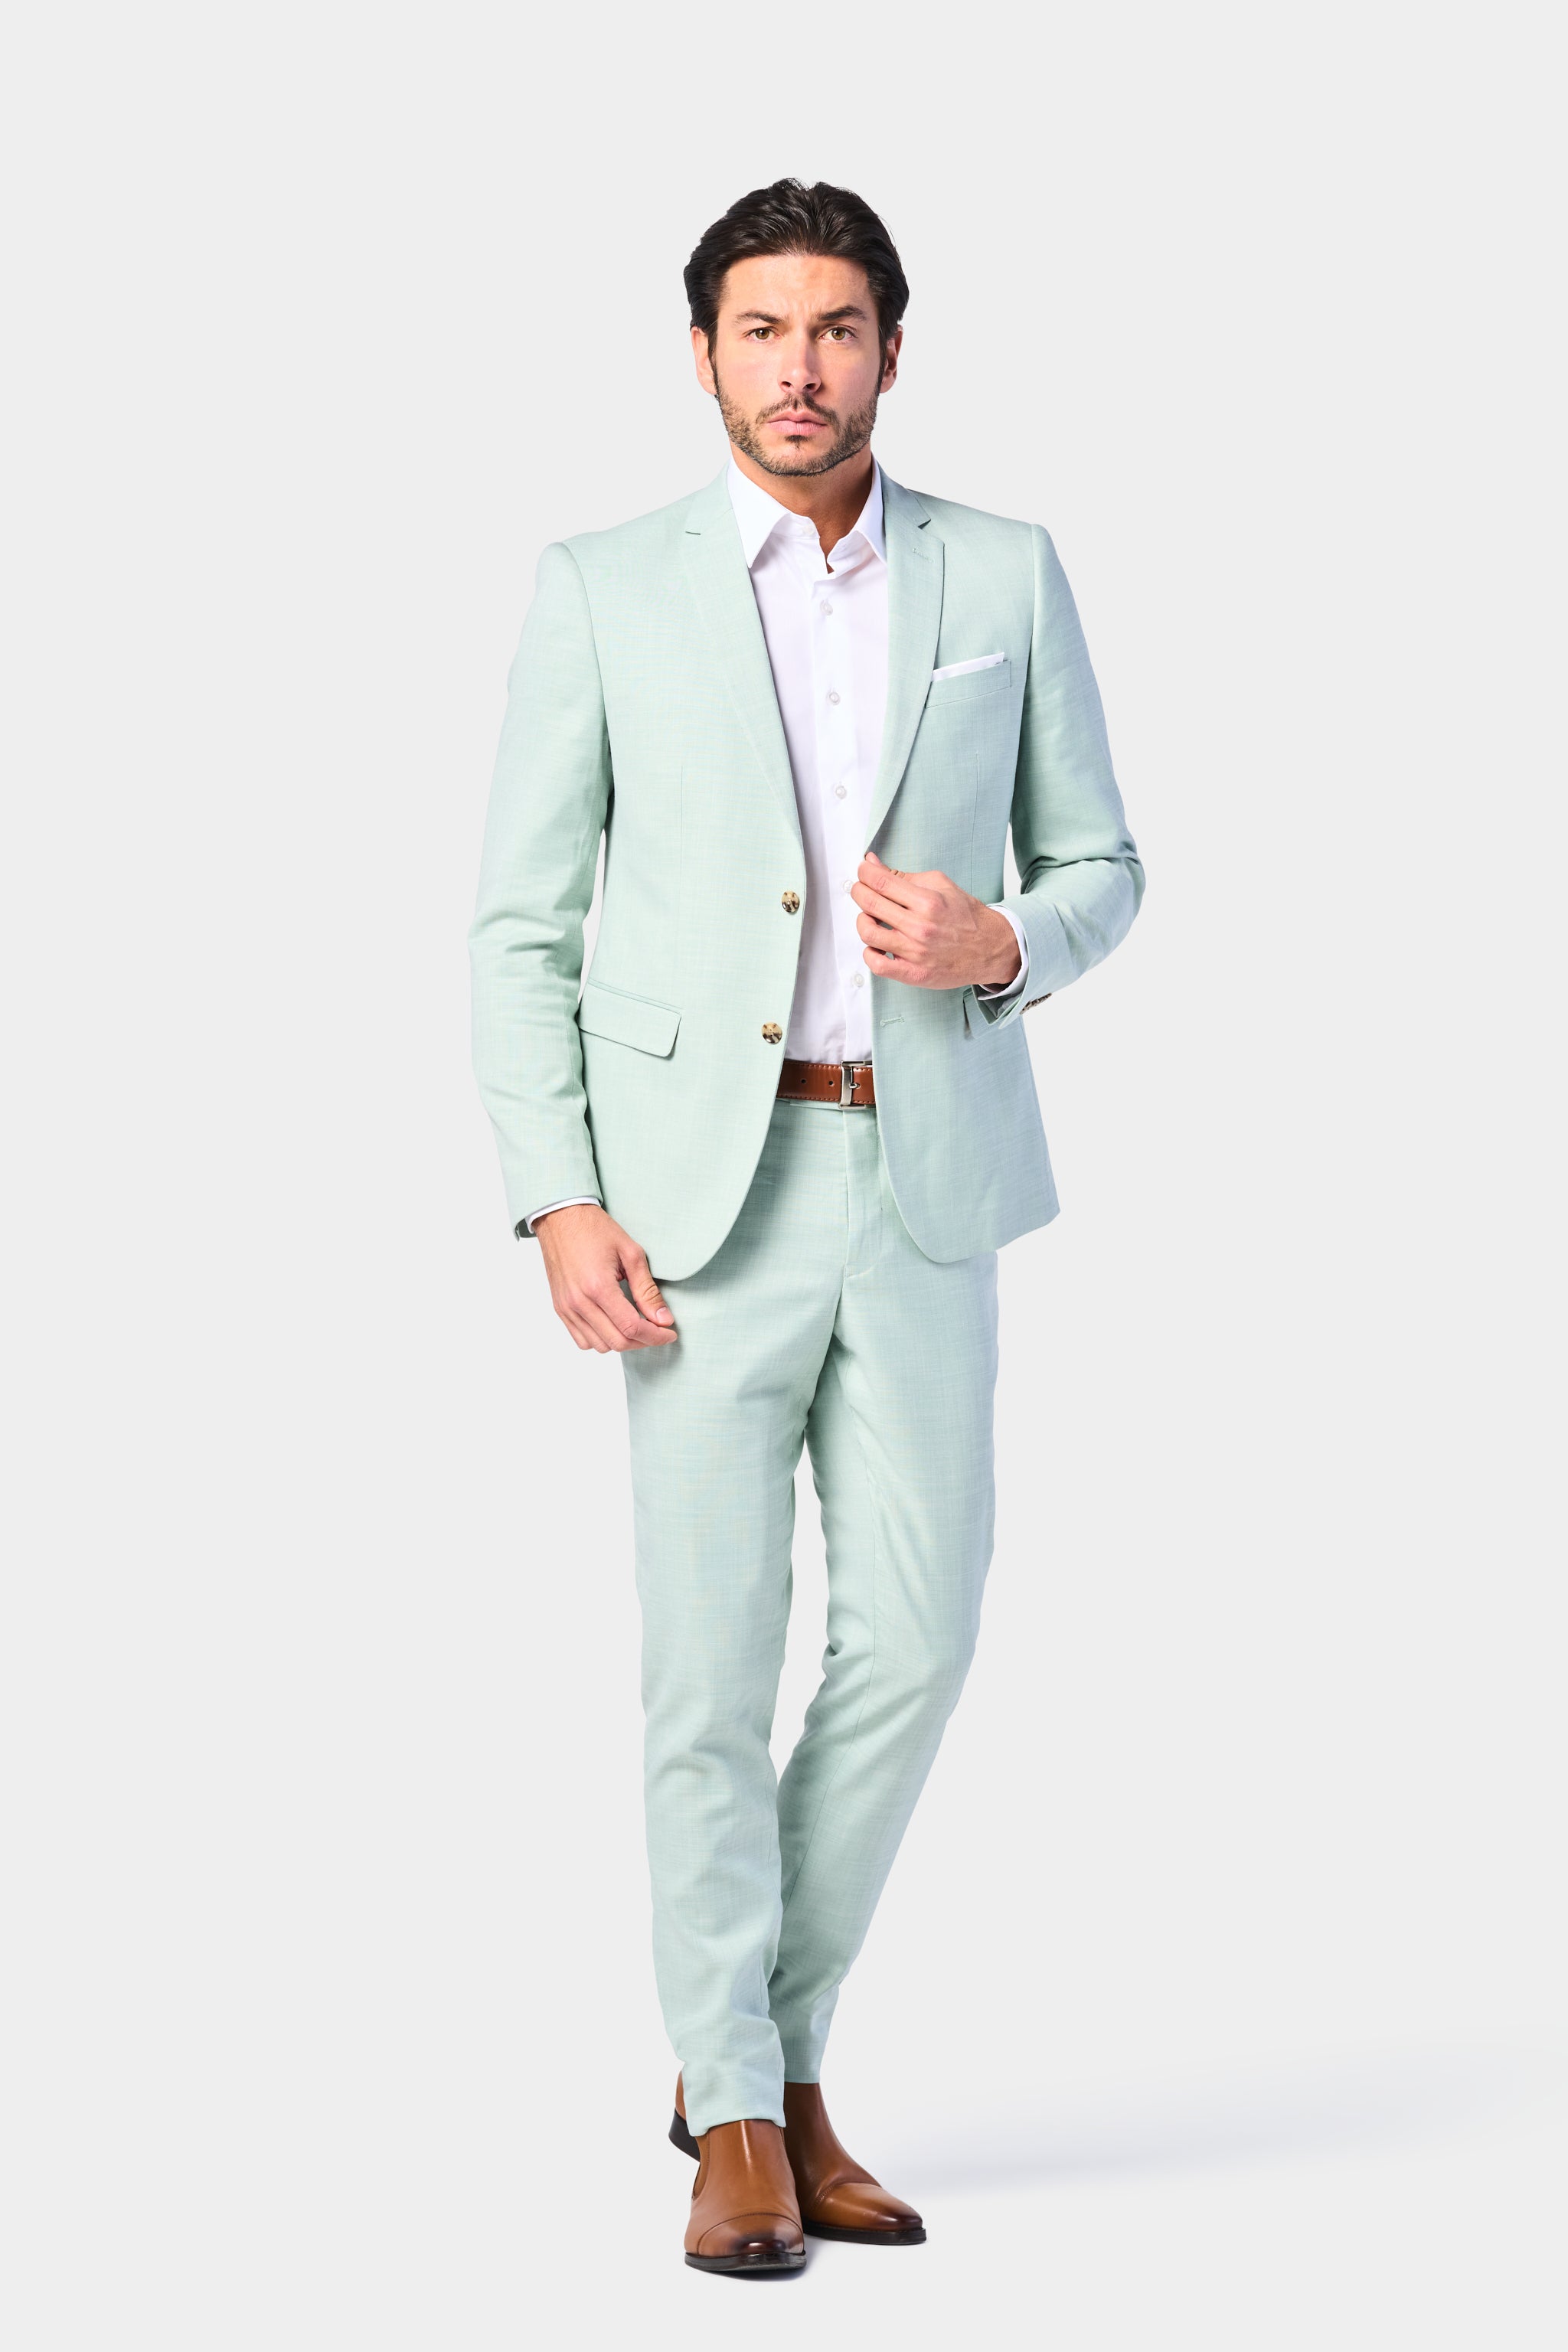 Salmon Pink 2 Button Suit, Suits Starting At $199